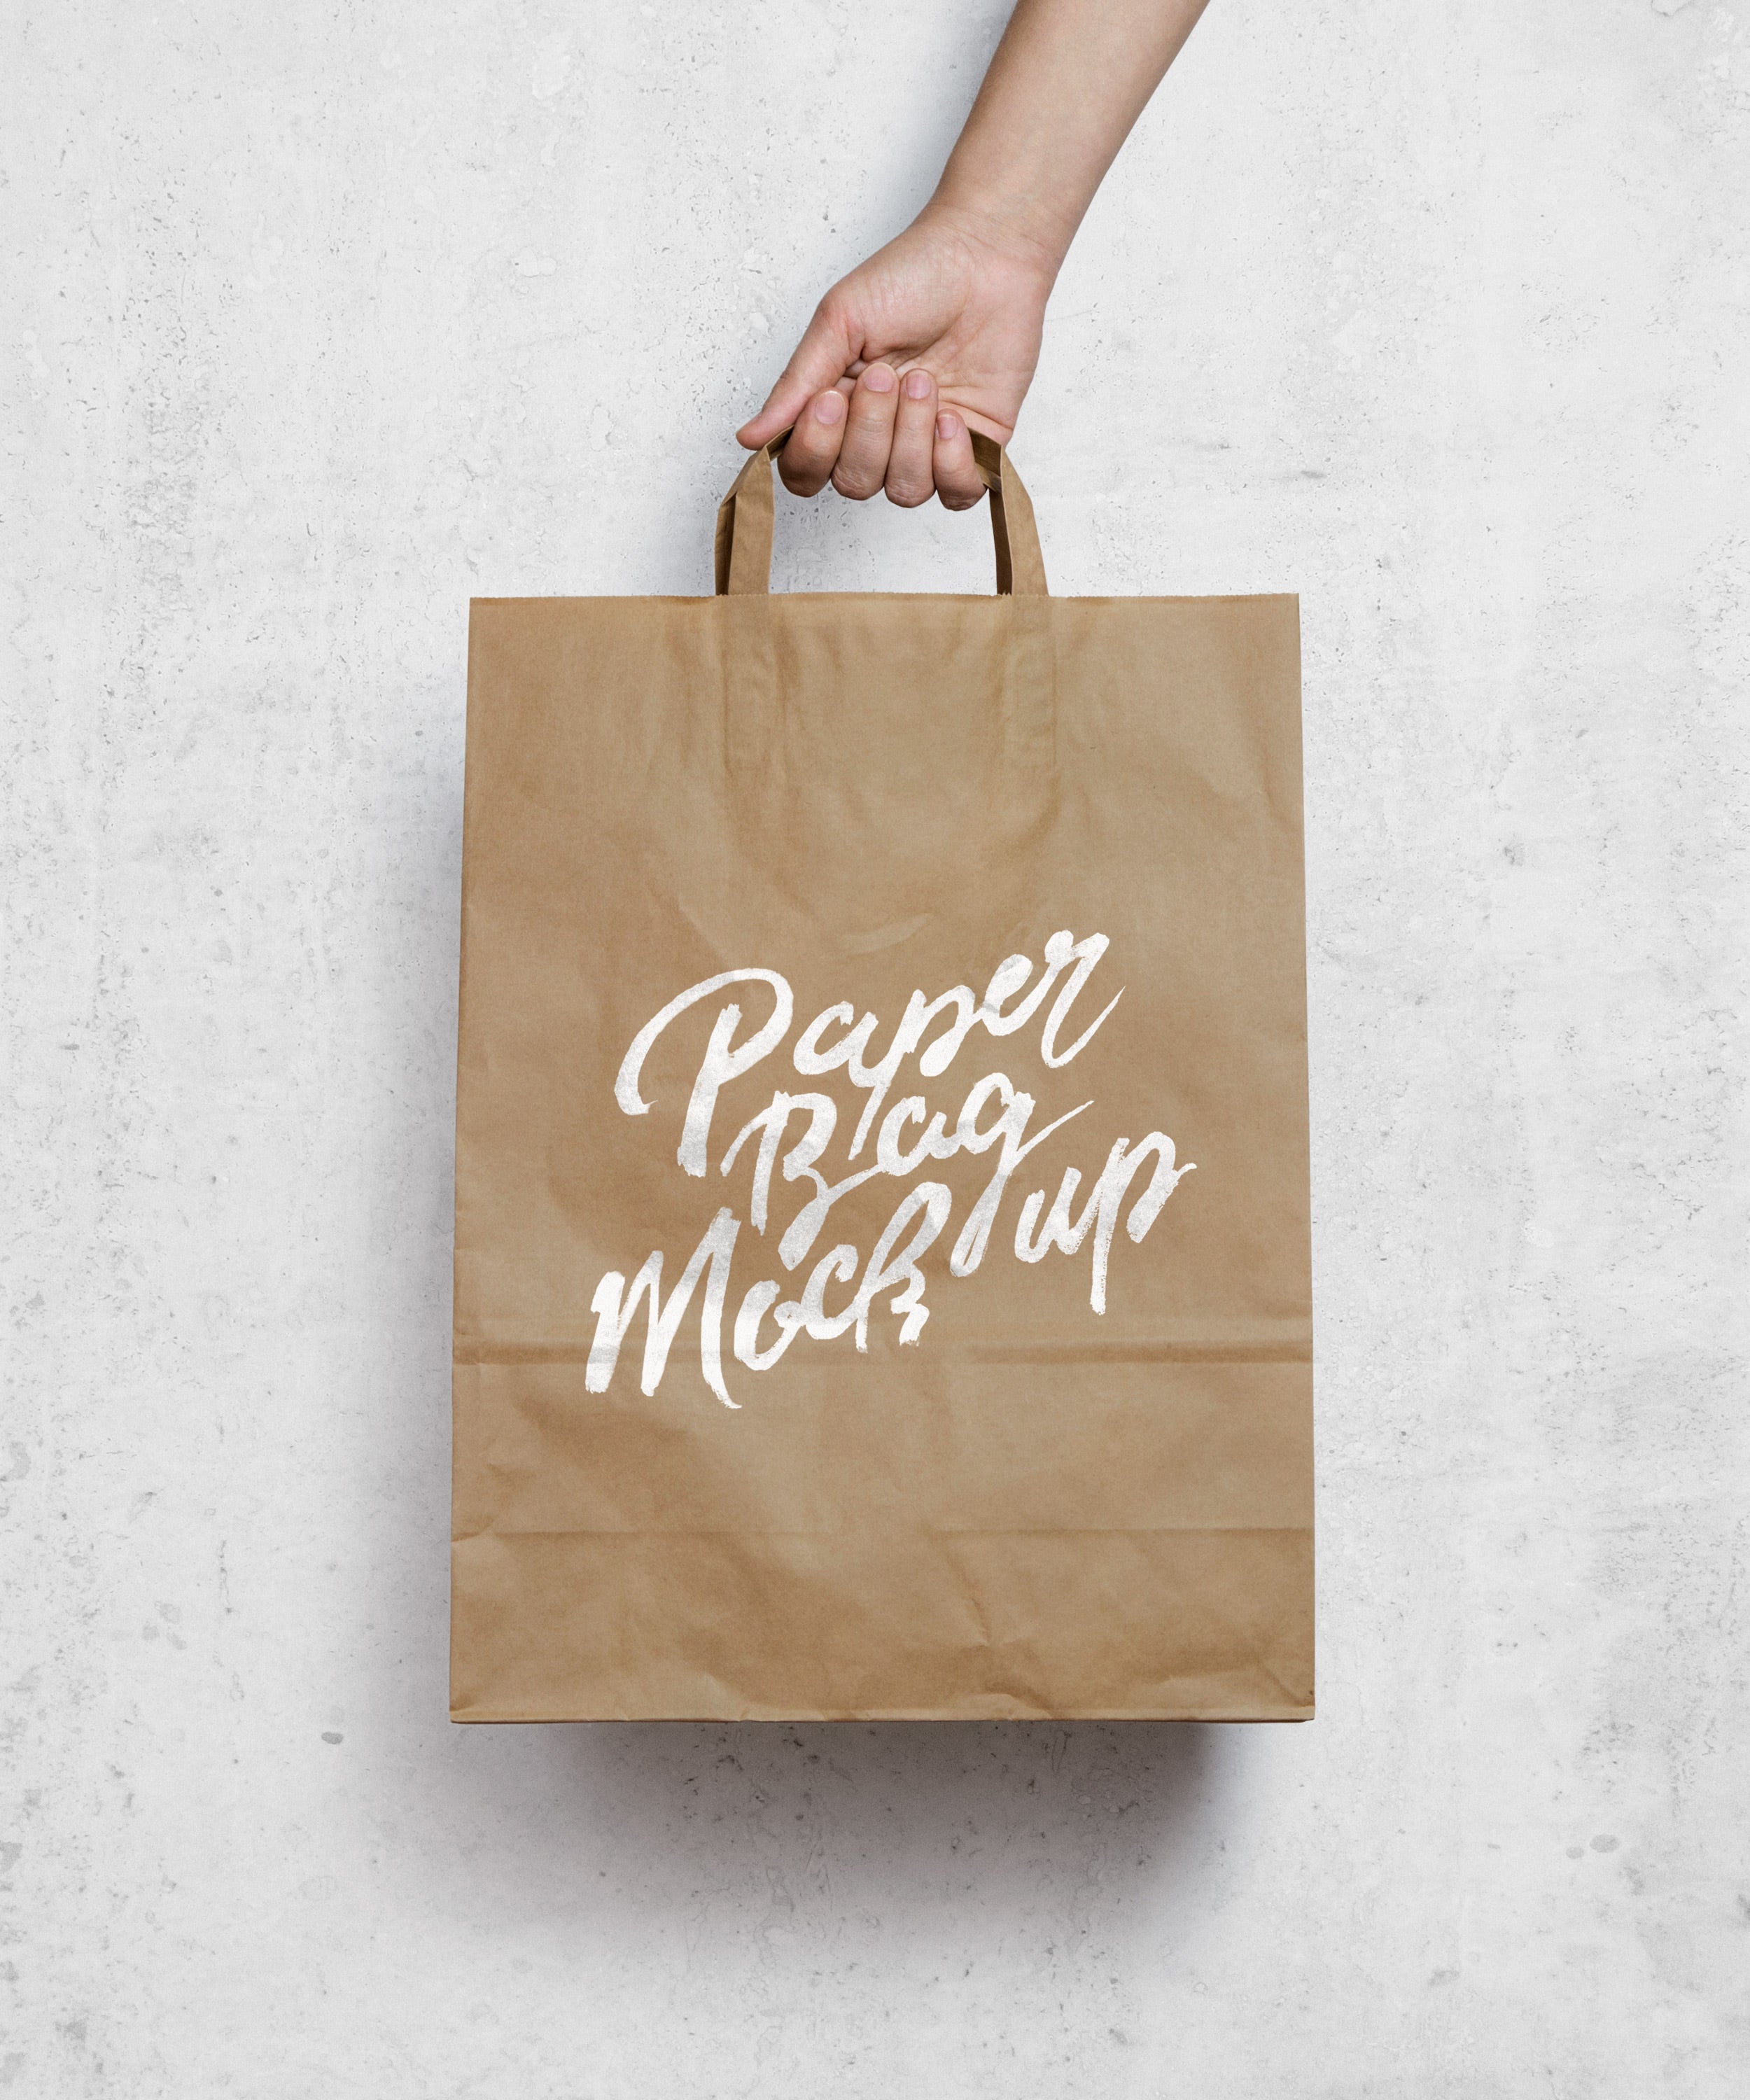 Download Free Hand Holding a Brown Paper Bag MockUp - CreativeBooster